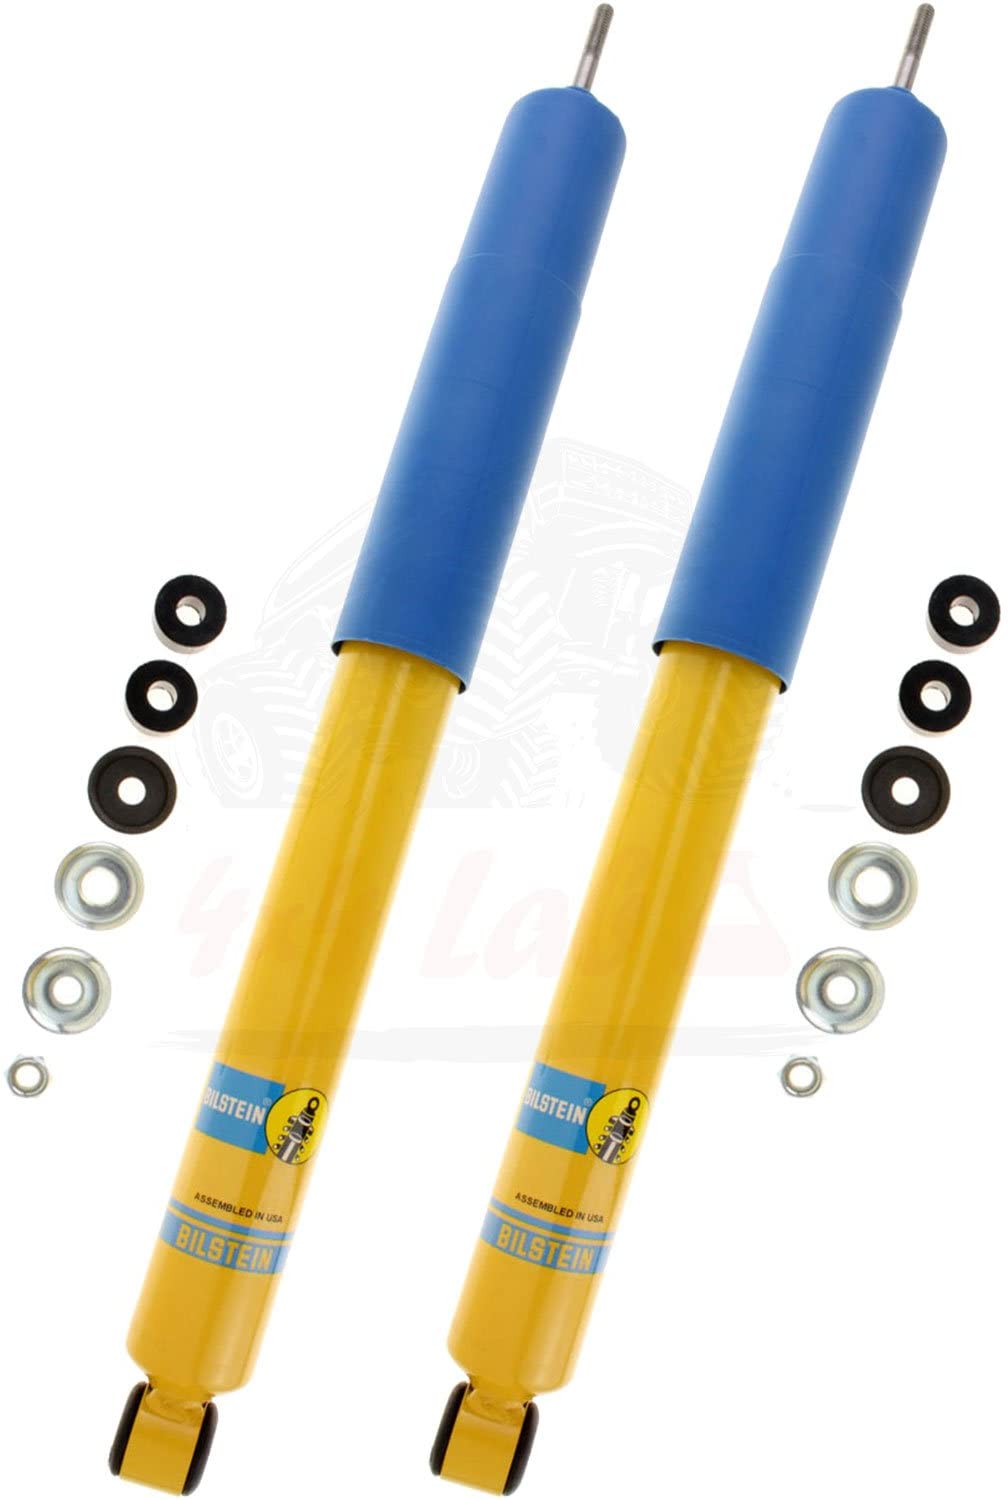 Bilstein B6 4600 Series 2 Rear Shocks Kit for 05-'13 Toyota Tacoma 4WD Ride Monotube replacement Gas Charged Shock absorbers part number 24-186056